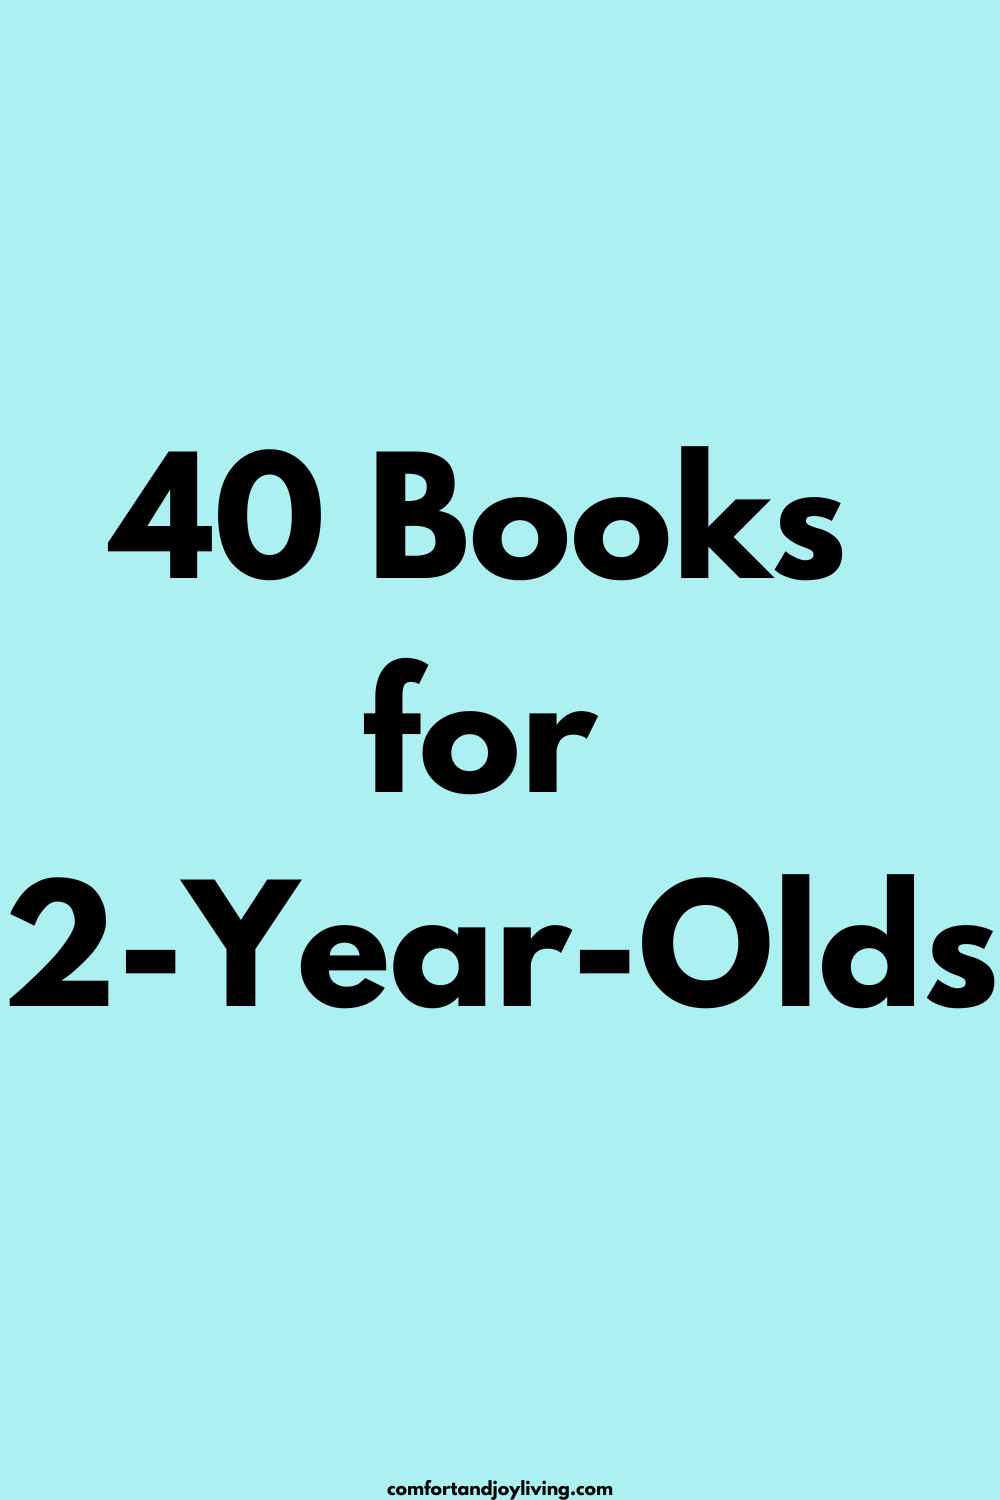 40 Books for 2-Year-Olds